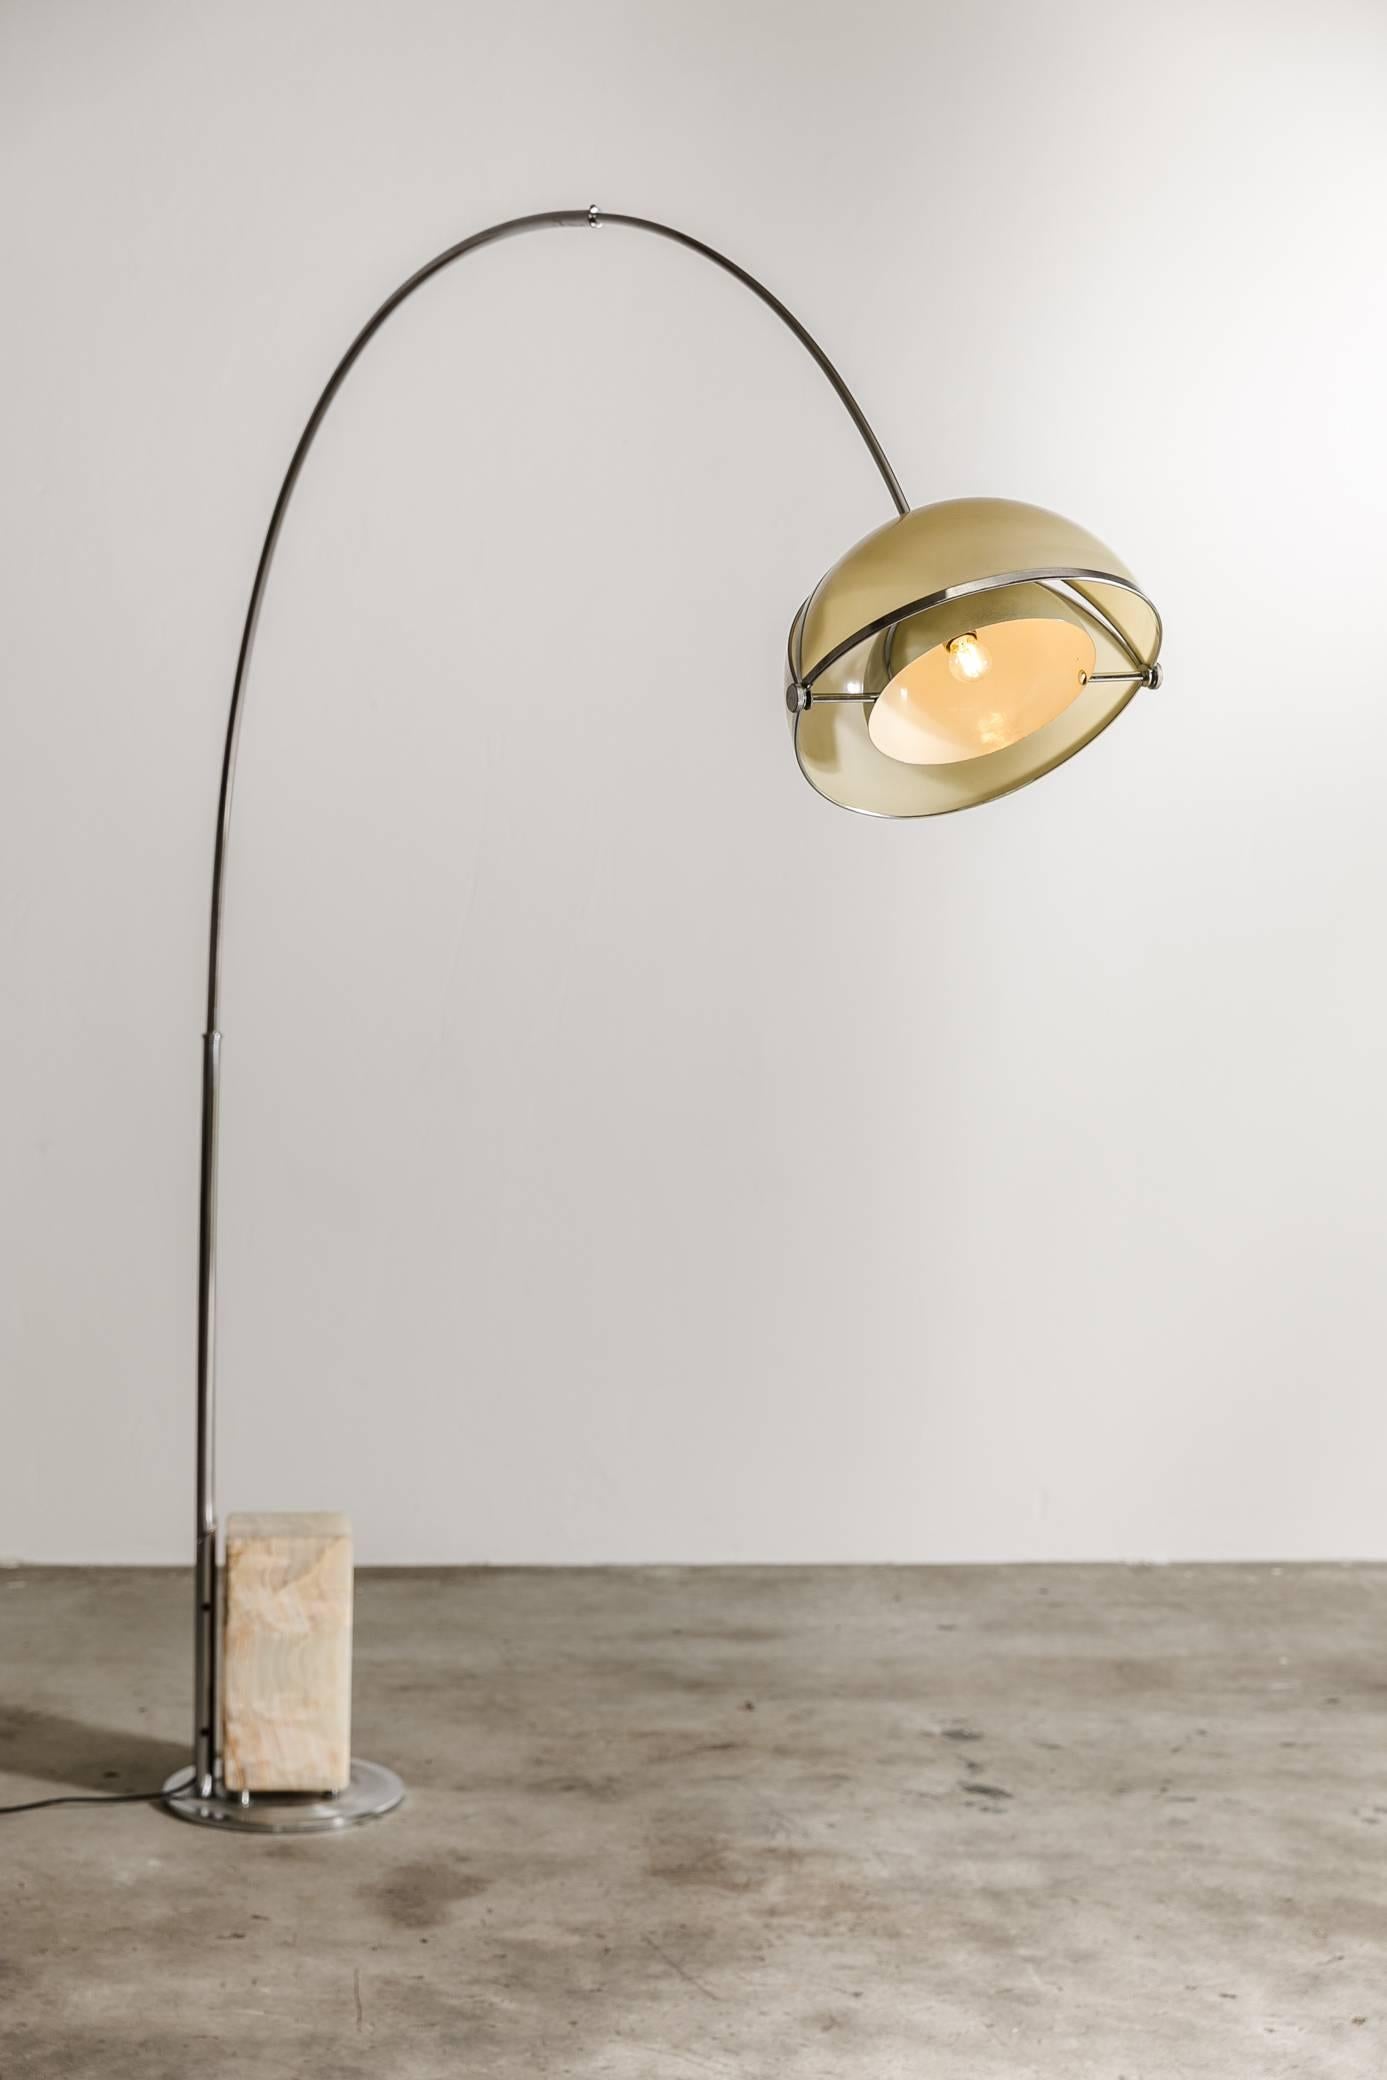 Mid-Century Modern Oolok/Molok Arco Lamp In the style of  Superstudio, 1968, Italy